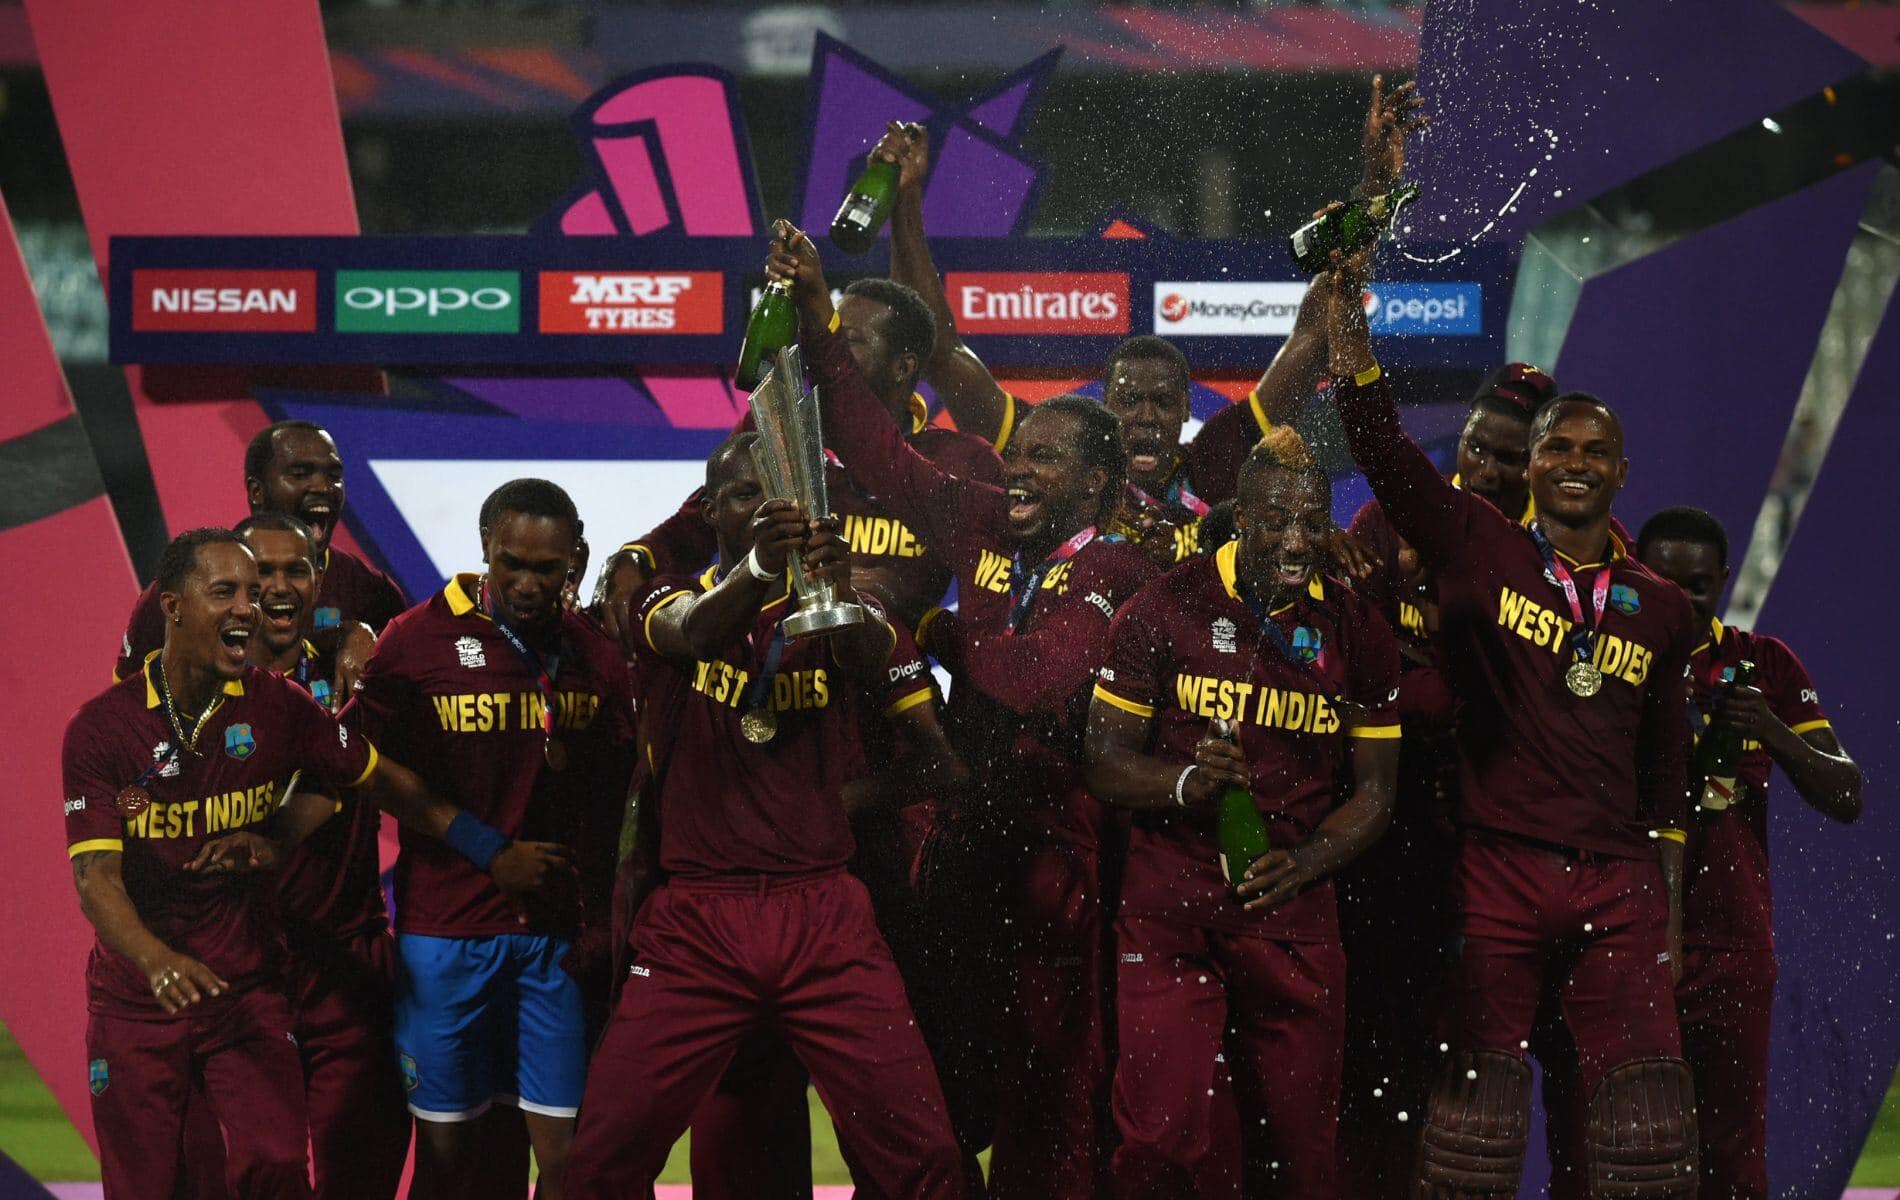 West Indies have won T20 World Cups in 2012 & 2016 (Twitter)